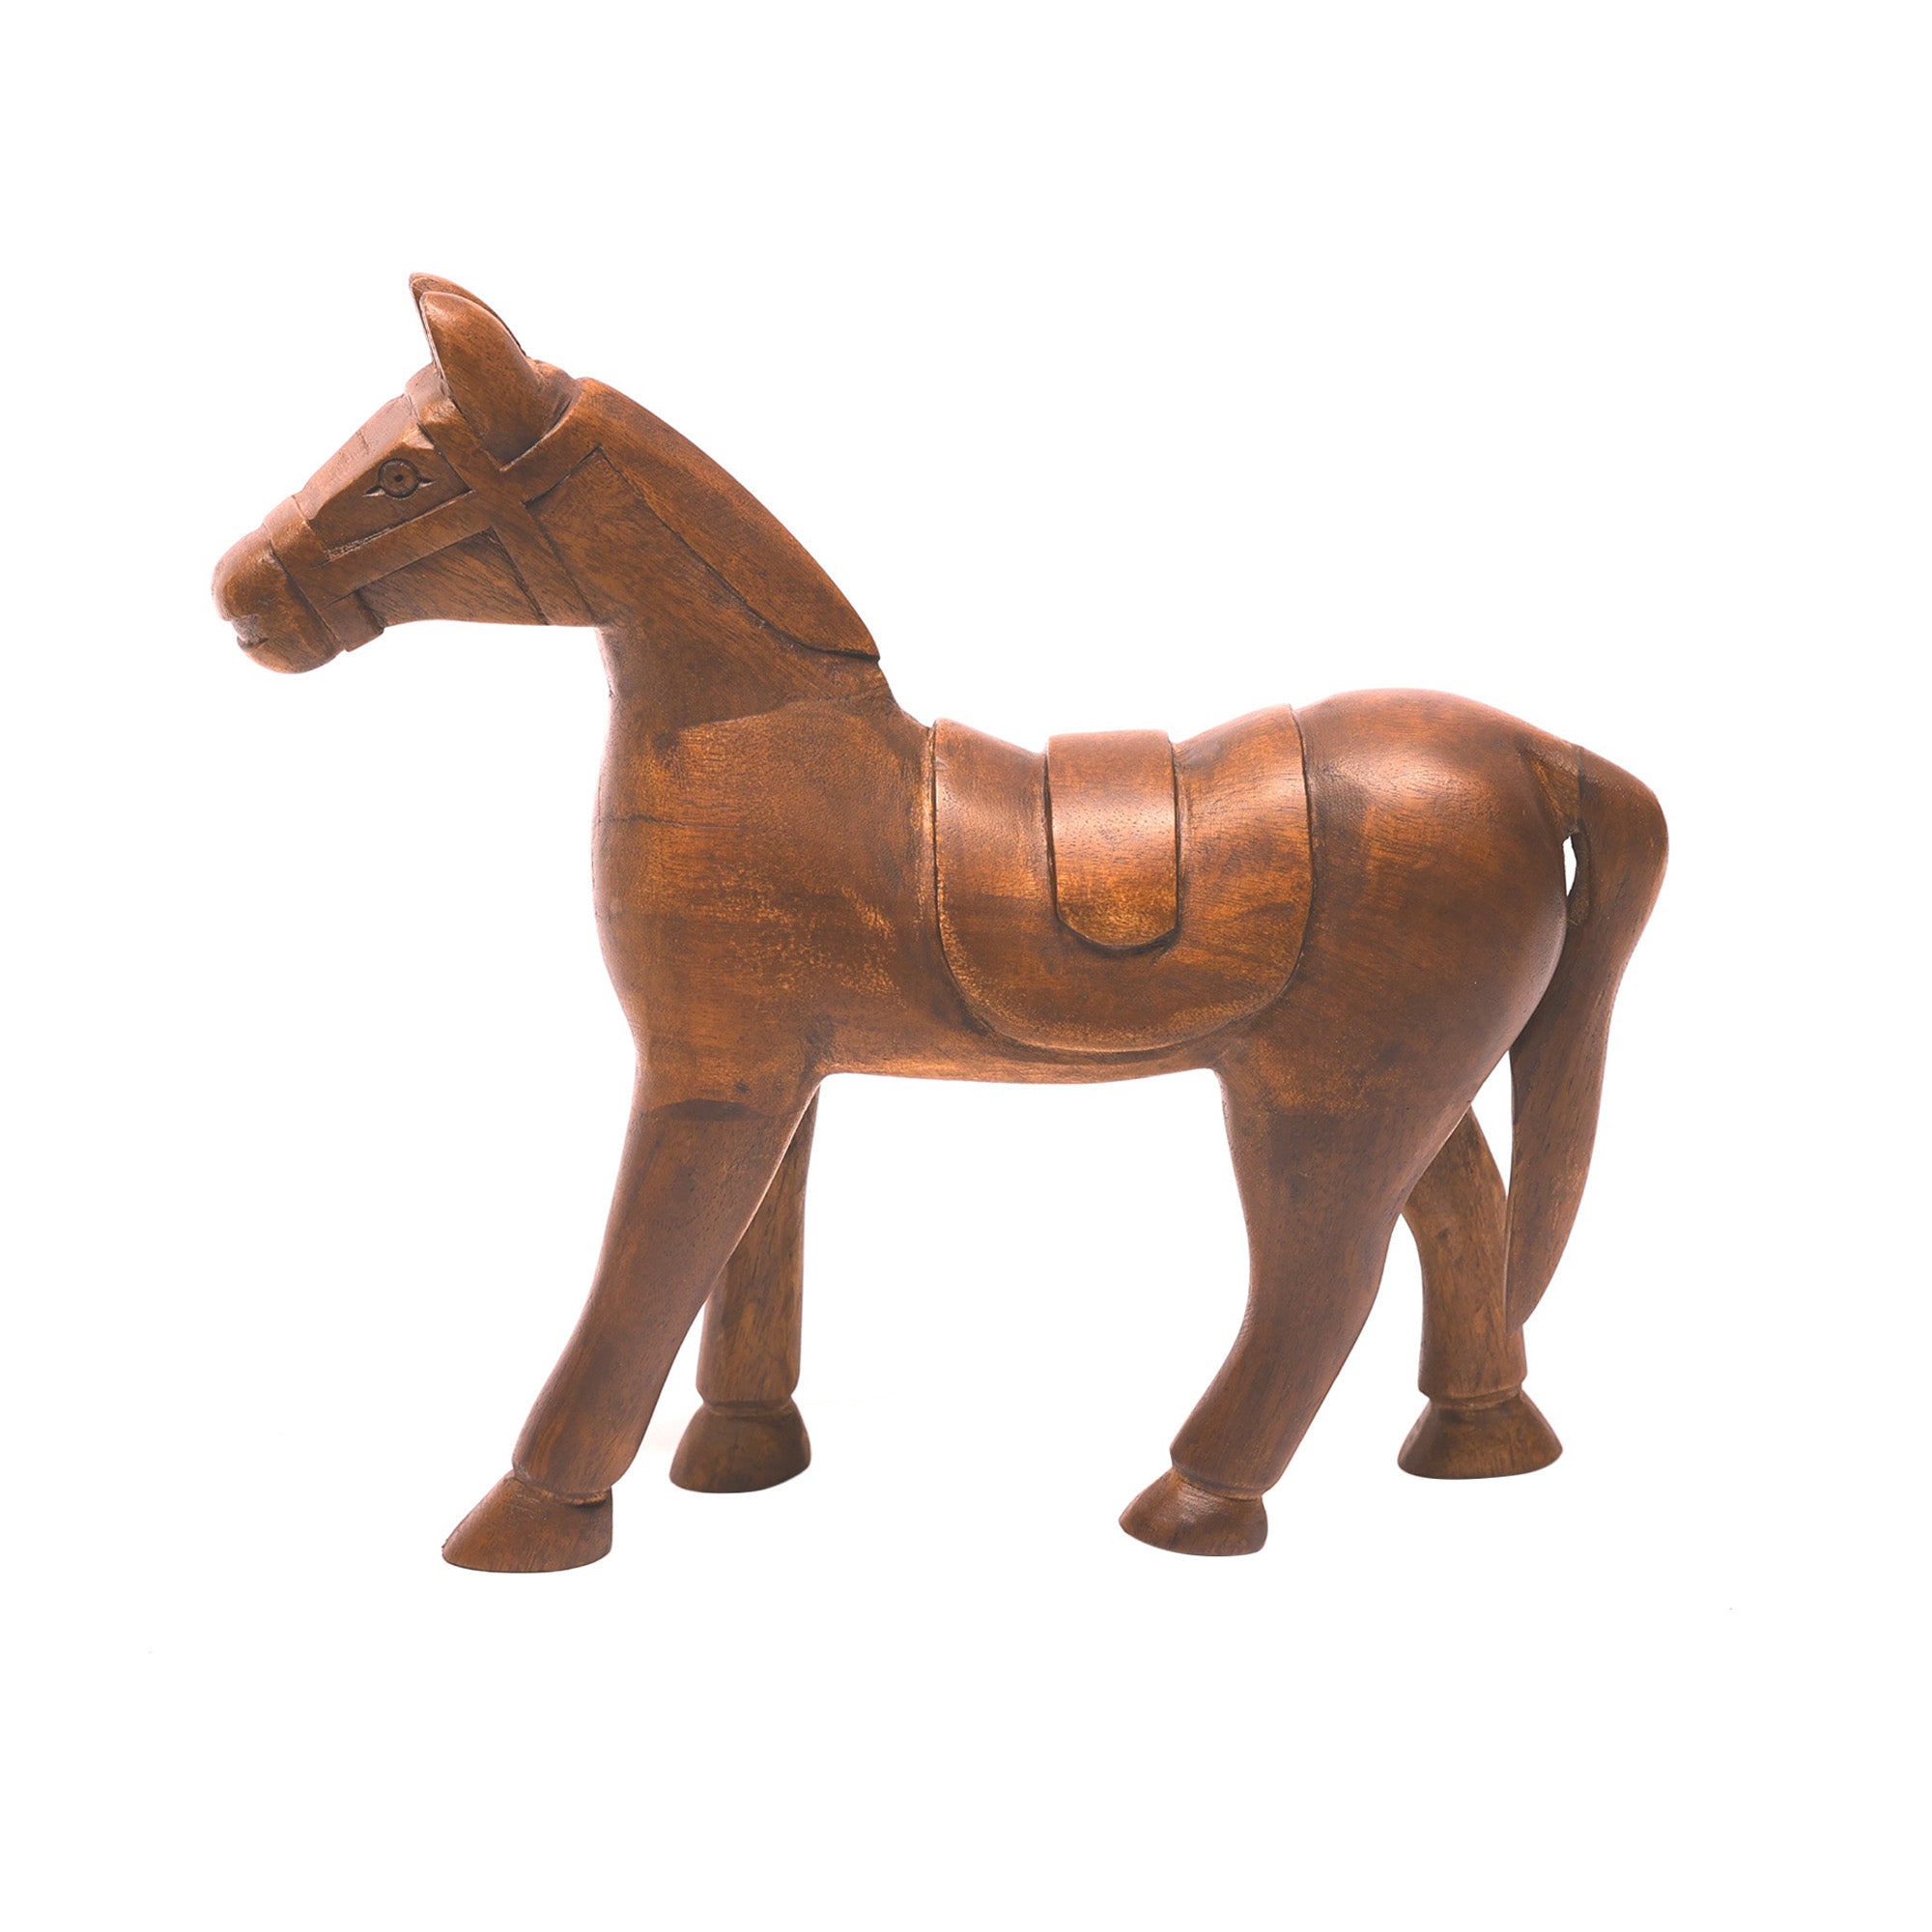 Walking Style Carved wooden Horse Animal Figurine